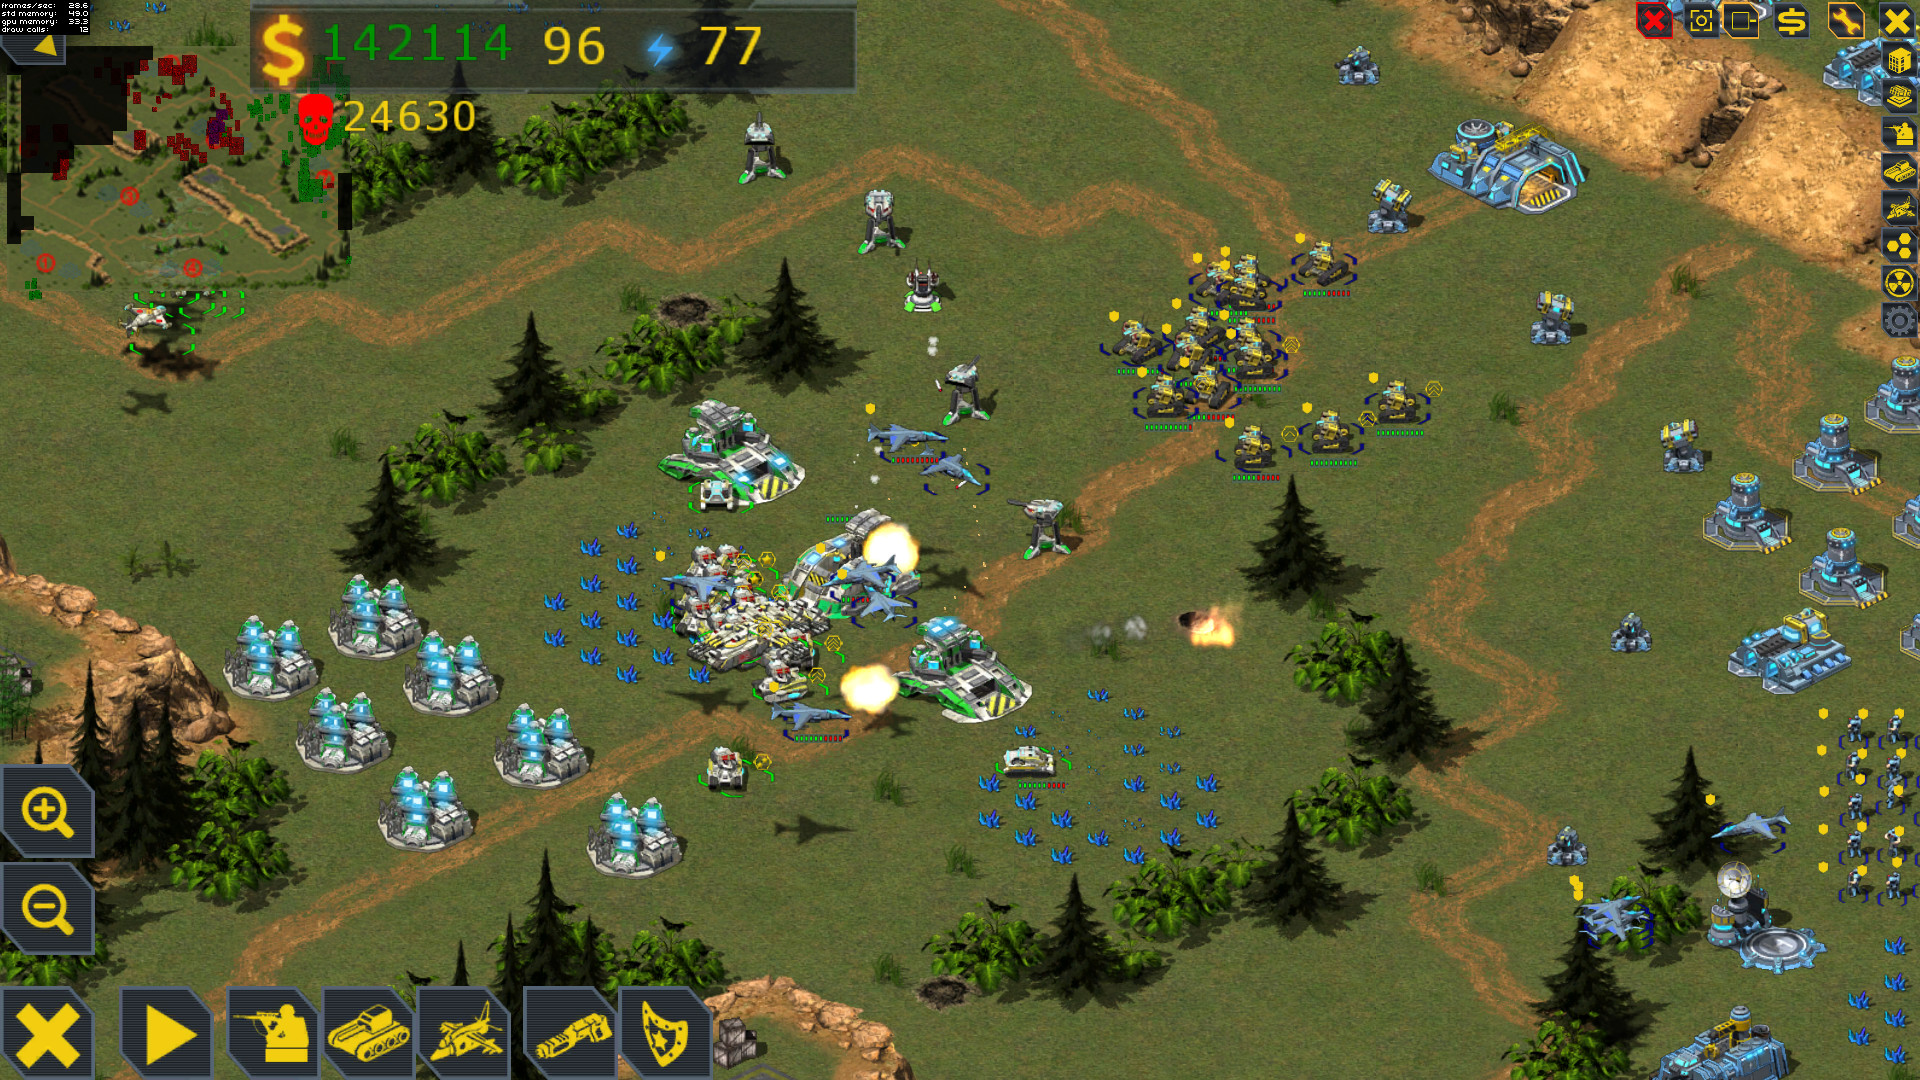 T me dmg rts. RTS игры. Стратегическая игра RTS. "RTS"RTS 017-00317. RTS игр (real-time Strategy).